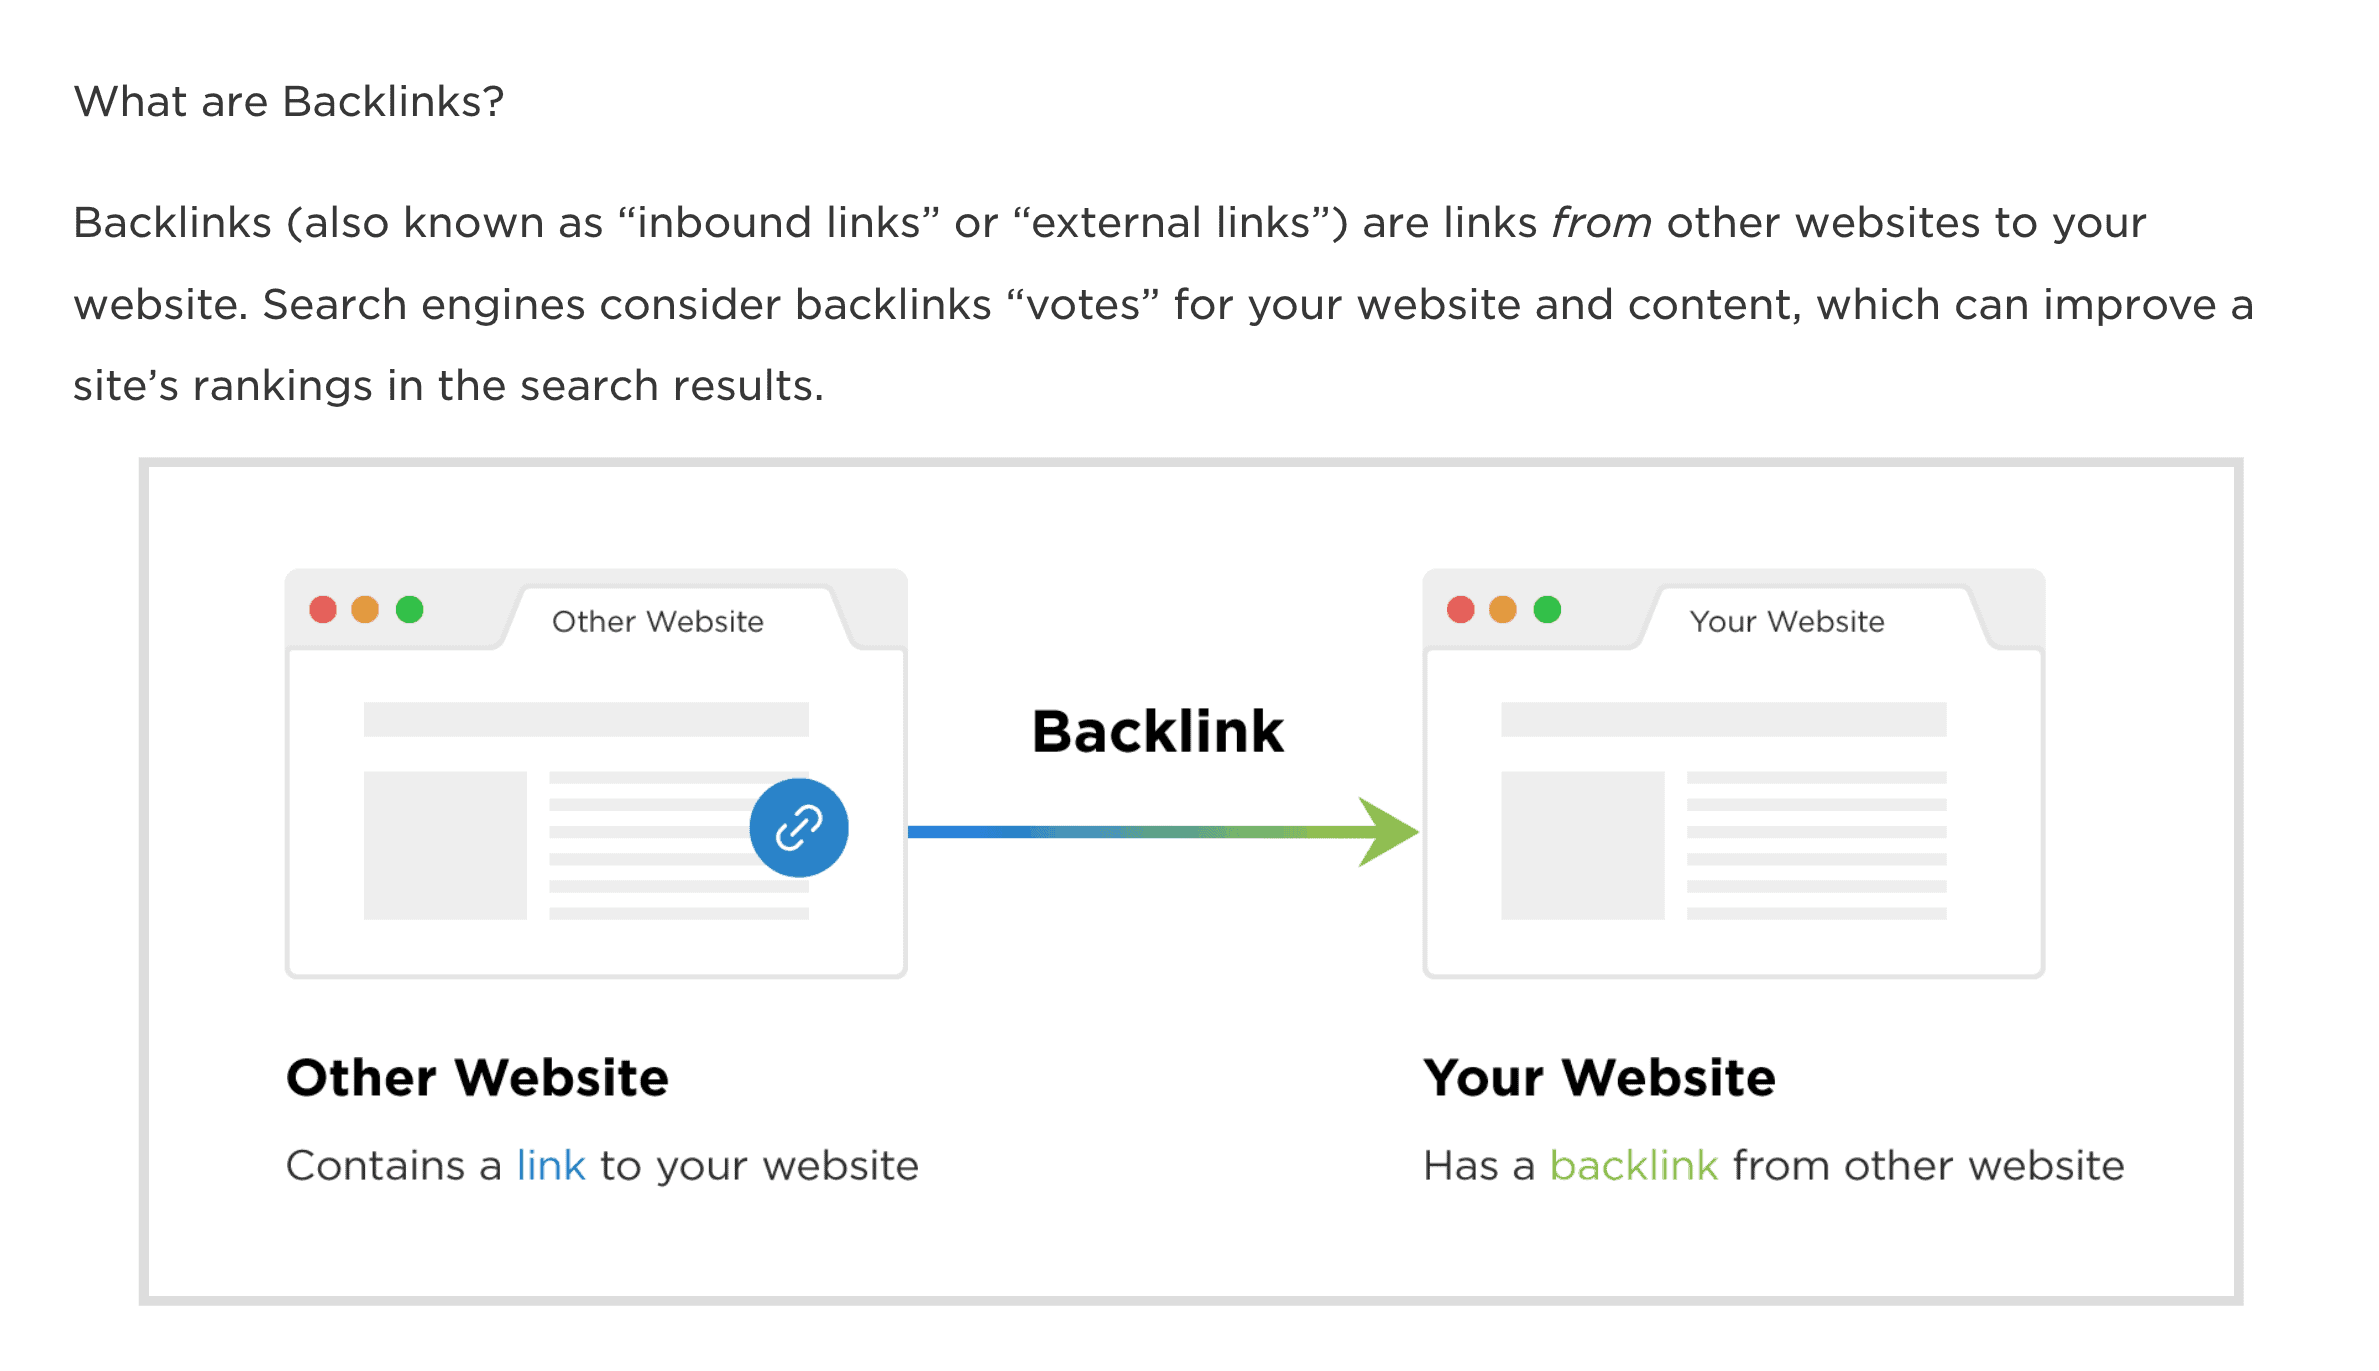 "What are Backlinks?" post section